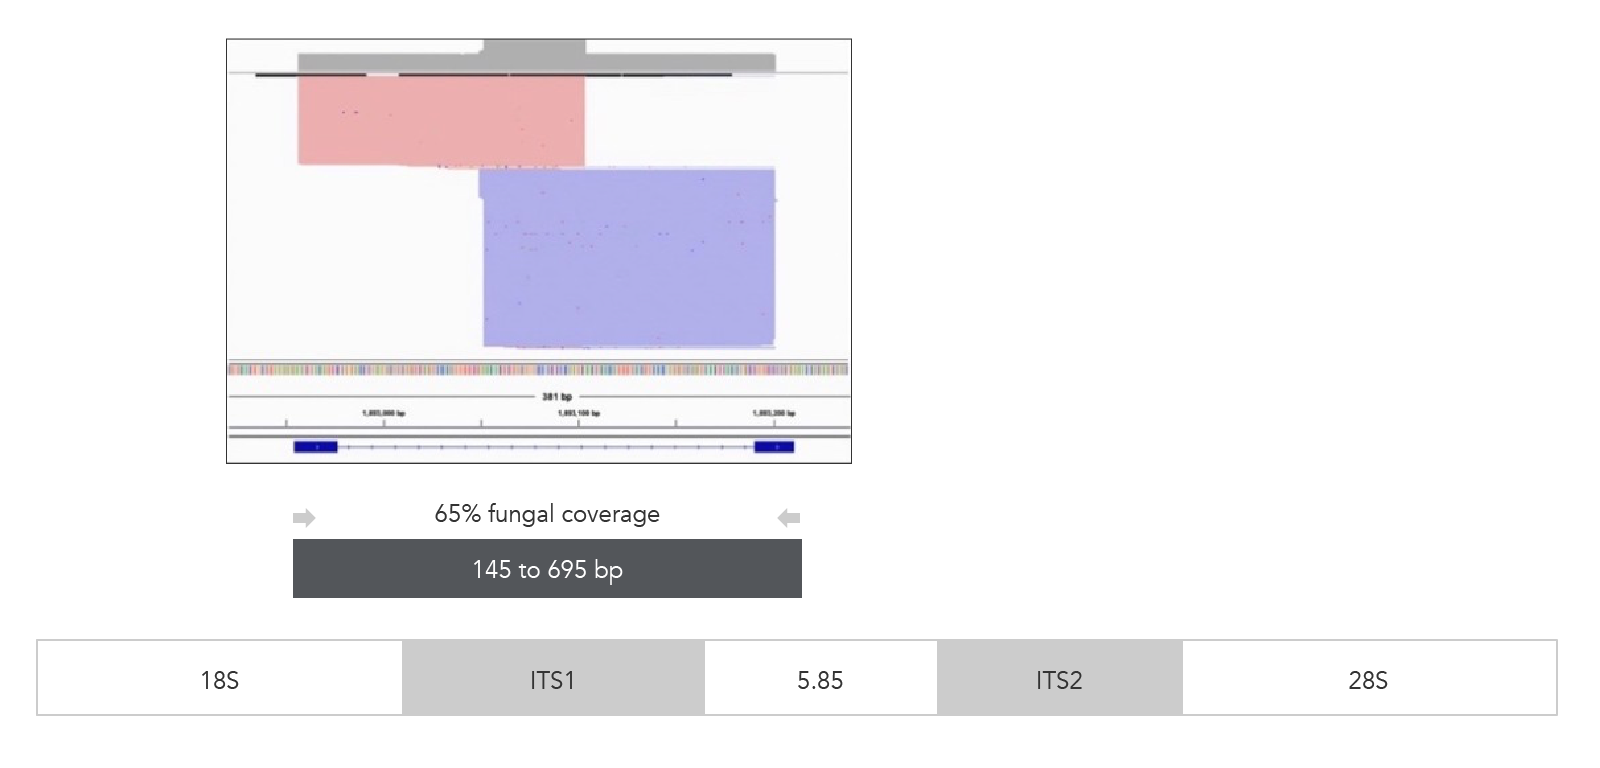 The xGen ITS1 Amplicon Panel targets the internal transcribed spacer regions of the rRNA genes